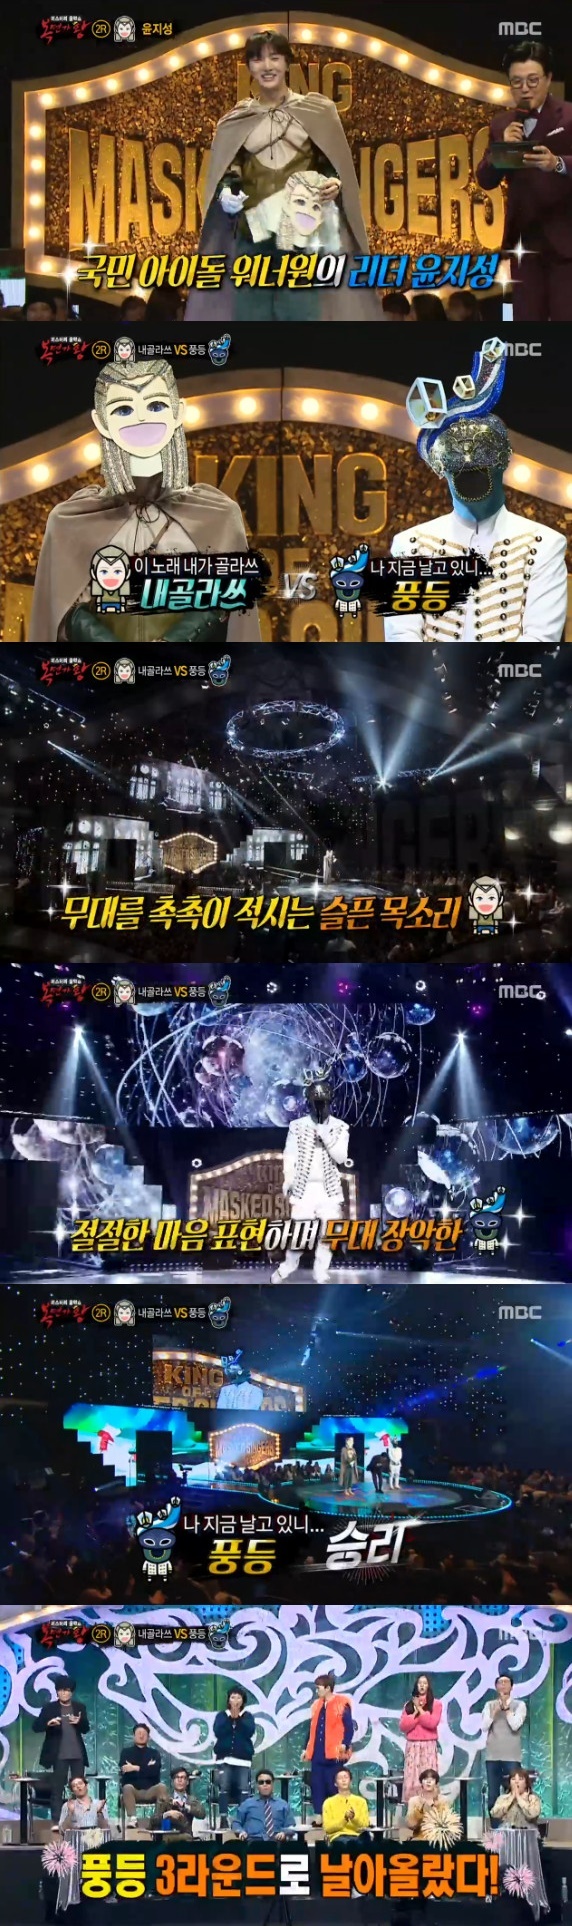 Seoul=) = King of Mask Singer The Identity of Nagolatsu was Wanna One Yoon Ji-sung.In the second round of MBCs Night - Mystery Music Show King of Mask Singer (hereinafter referred to as King of Mask Singer), which was broadcast on the afternoon of the 13th, there was a confrontation between Nagolatsu and the wind.On this day, Nagolatsu selected Crushs SOFA. The vocals, which calmly fell down to the melody that stimulated emotions, gave the audience a lonely atmosphere.The wind lamp called Davichis Do not say goodbye and boasted a different charm and singing ability.After that, wind lamps beat Nagolatsu to advance to the third round; Identity of Nagolatsu was also revealed; he was Wanna One Yoon Ji-sung.Meanwhile, King of Mask Singer is a music variety program that shows off the singing skills on stage without wearing a mask and releasing Identity. It is broadcast every Sunday at 4:50 pm.